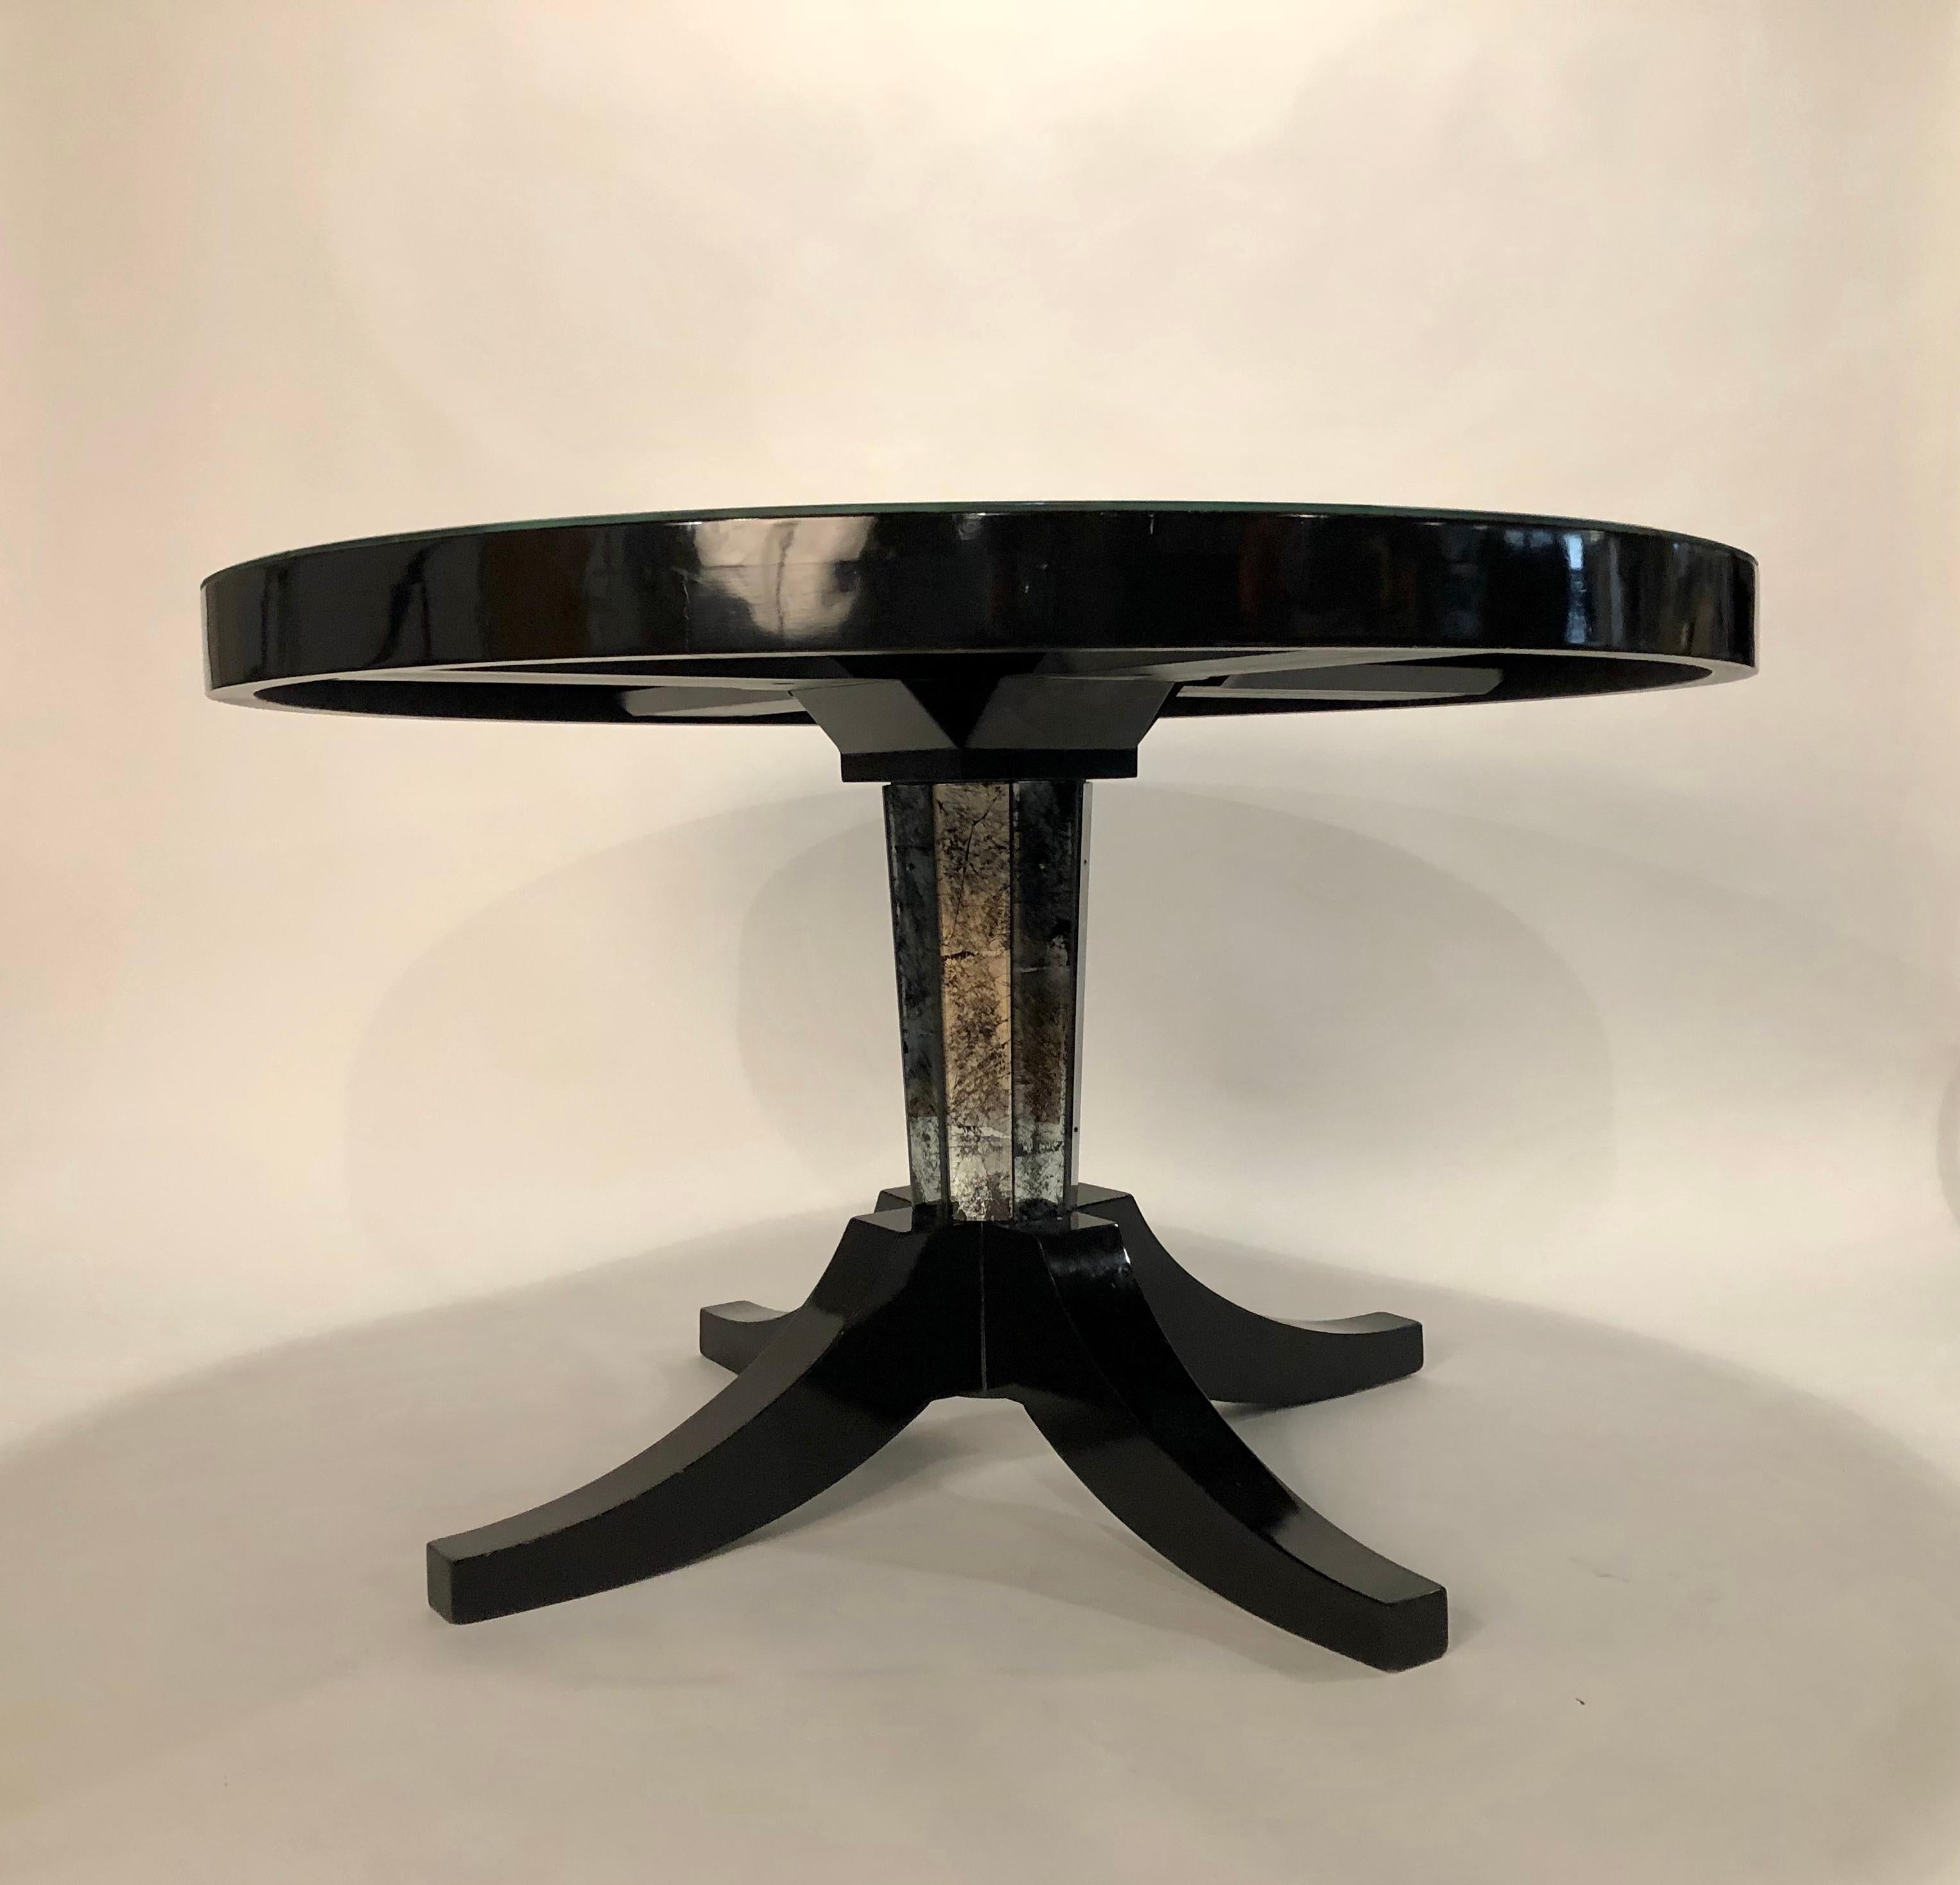 Exquisite Gueridon table by Maison Jansen in black lacquer and silvered/black mirrored top. The throat of the base echos the Églomisé top.